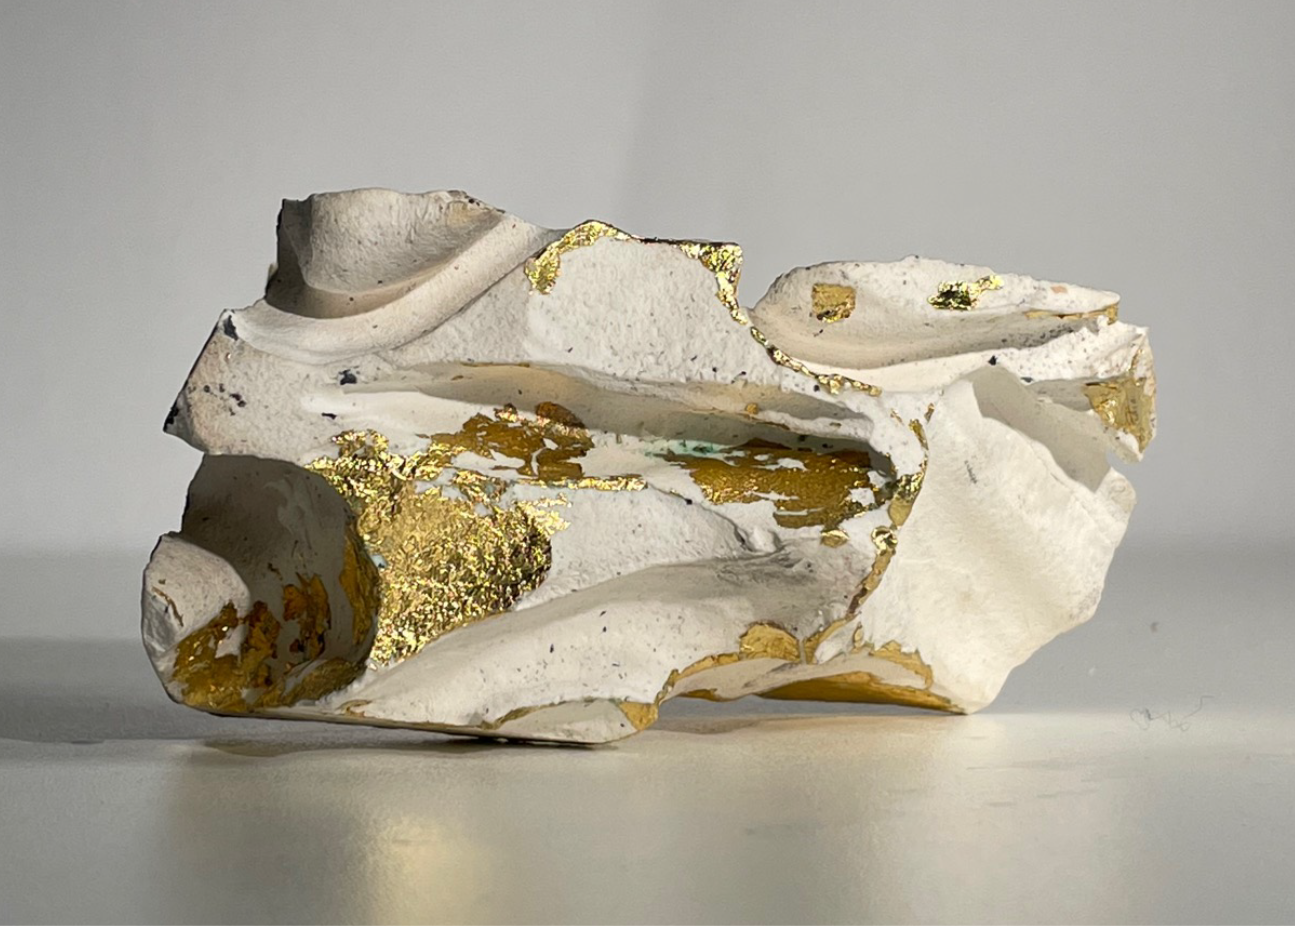 3D plaster sketch model inspired by flint, made by Georgia Keeble. The plaster shows intricate, sharp lines and details with a gold leaf that accents certain parts.